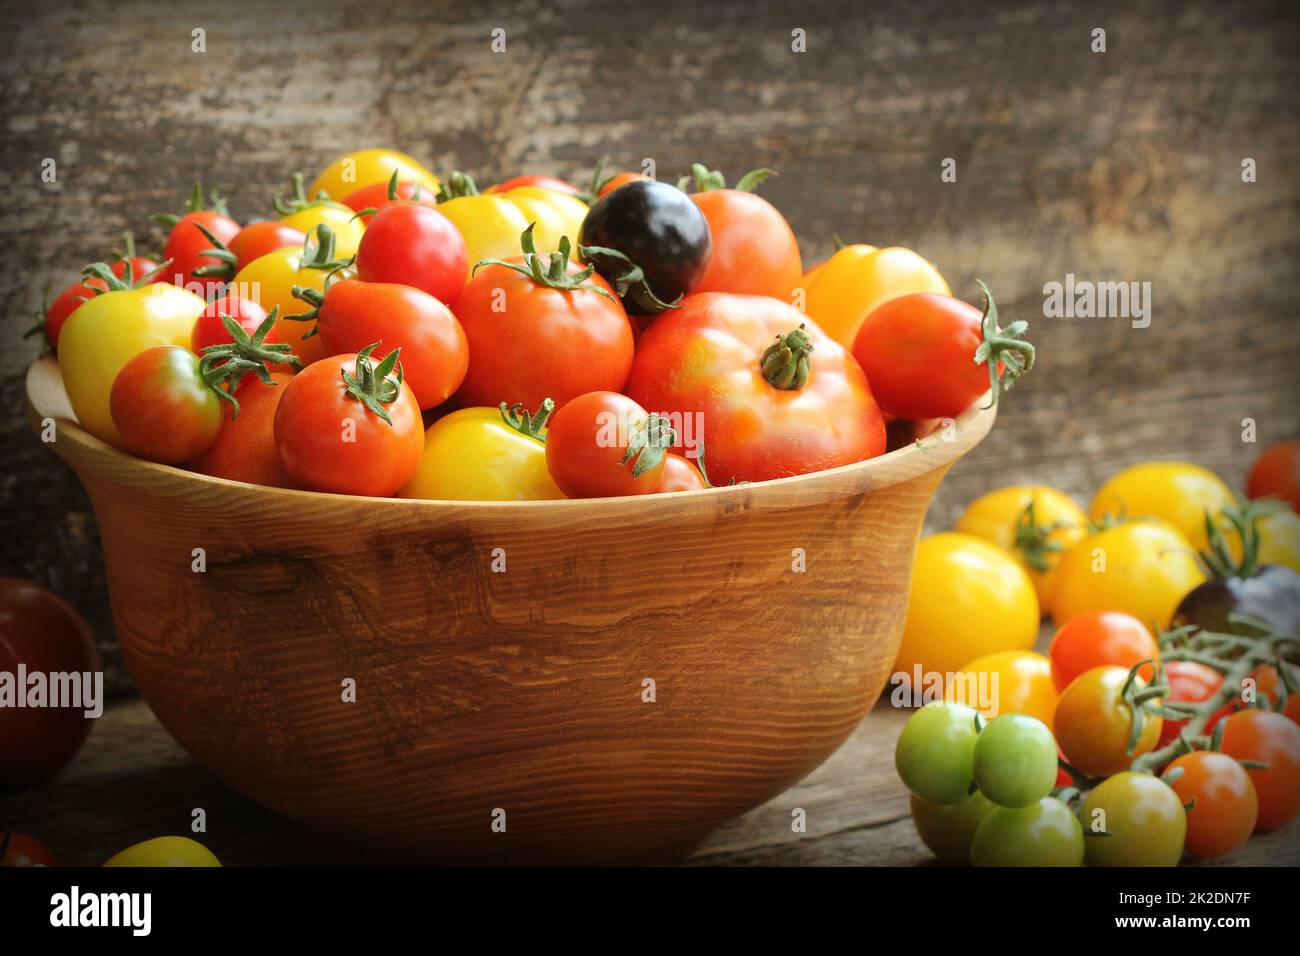 Wooden bowl with fresh vine ripened heirloom tomatoes from farmers market Stock Photo